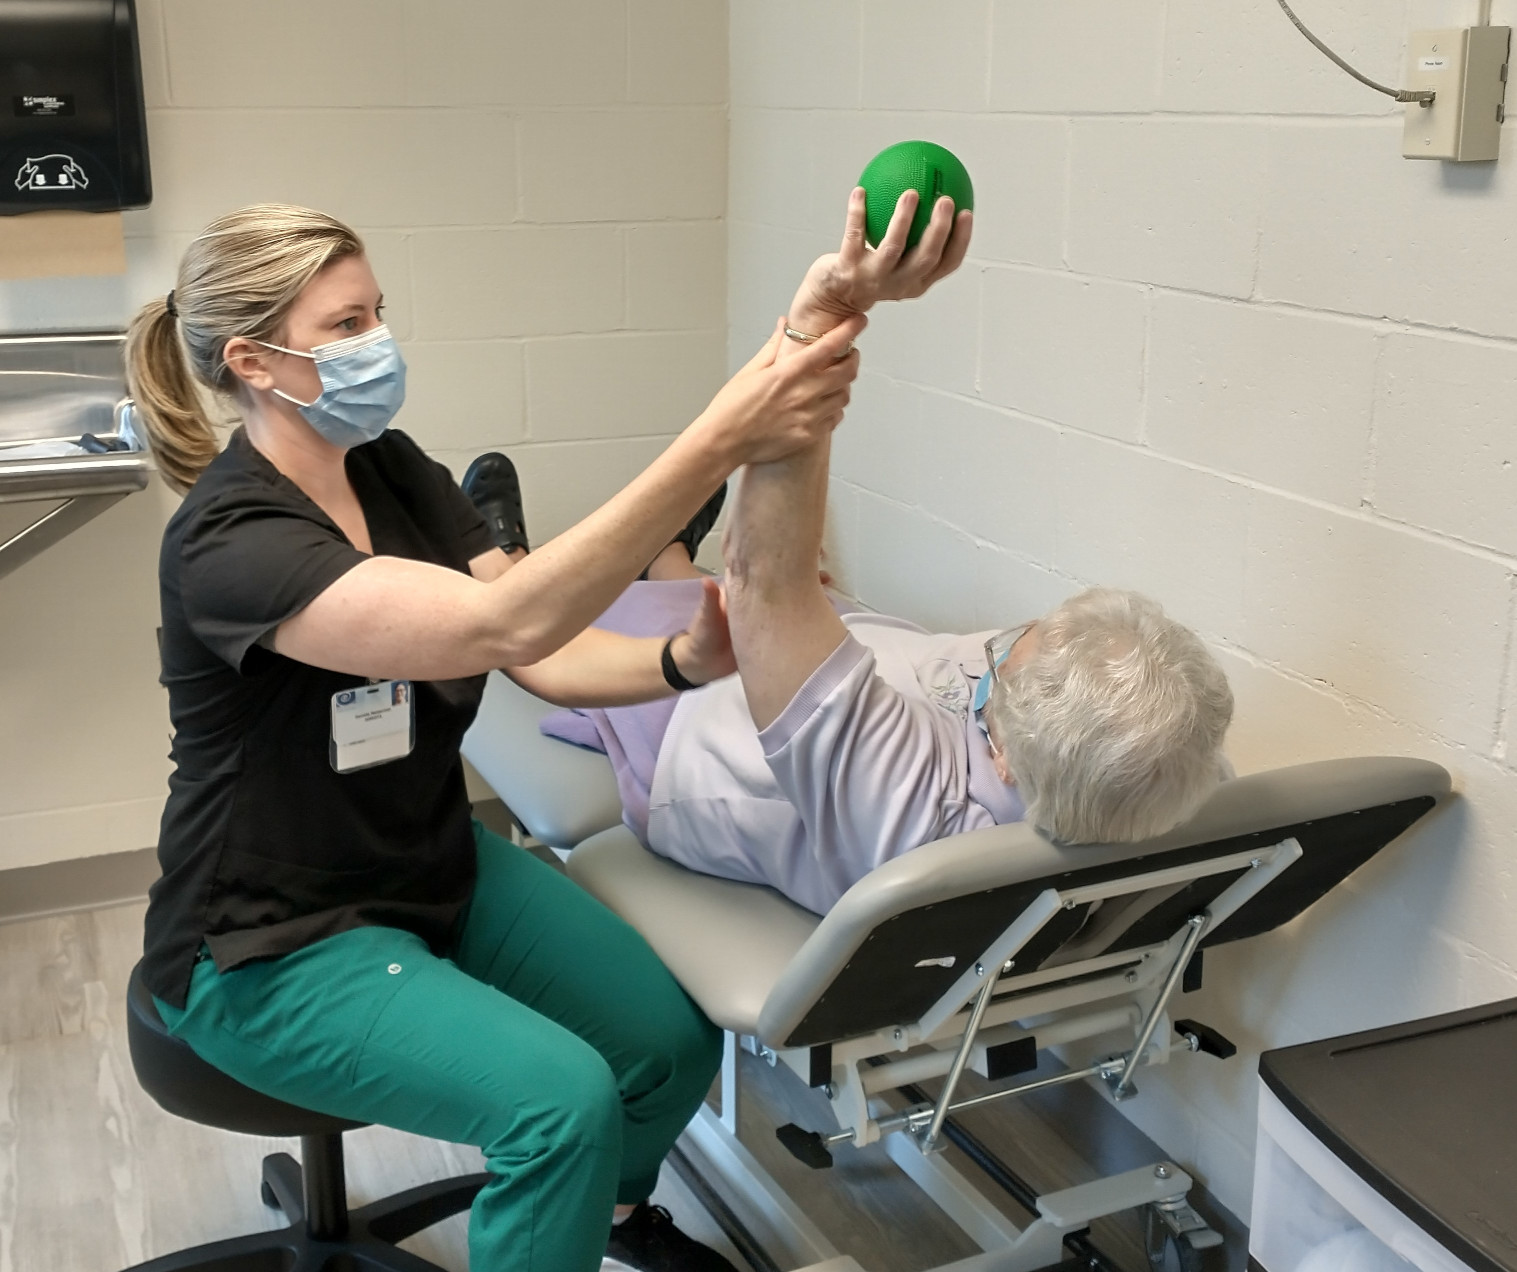 Bethany Receives Grant for Purchase of New Physical Therapy Equipment